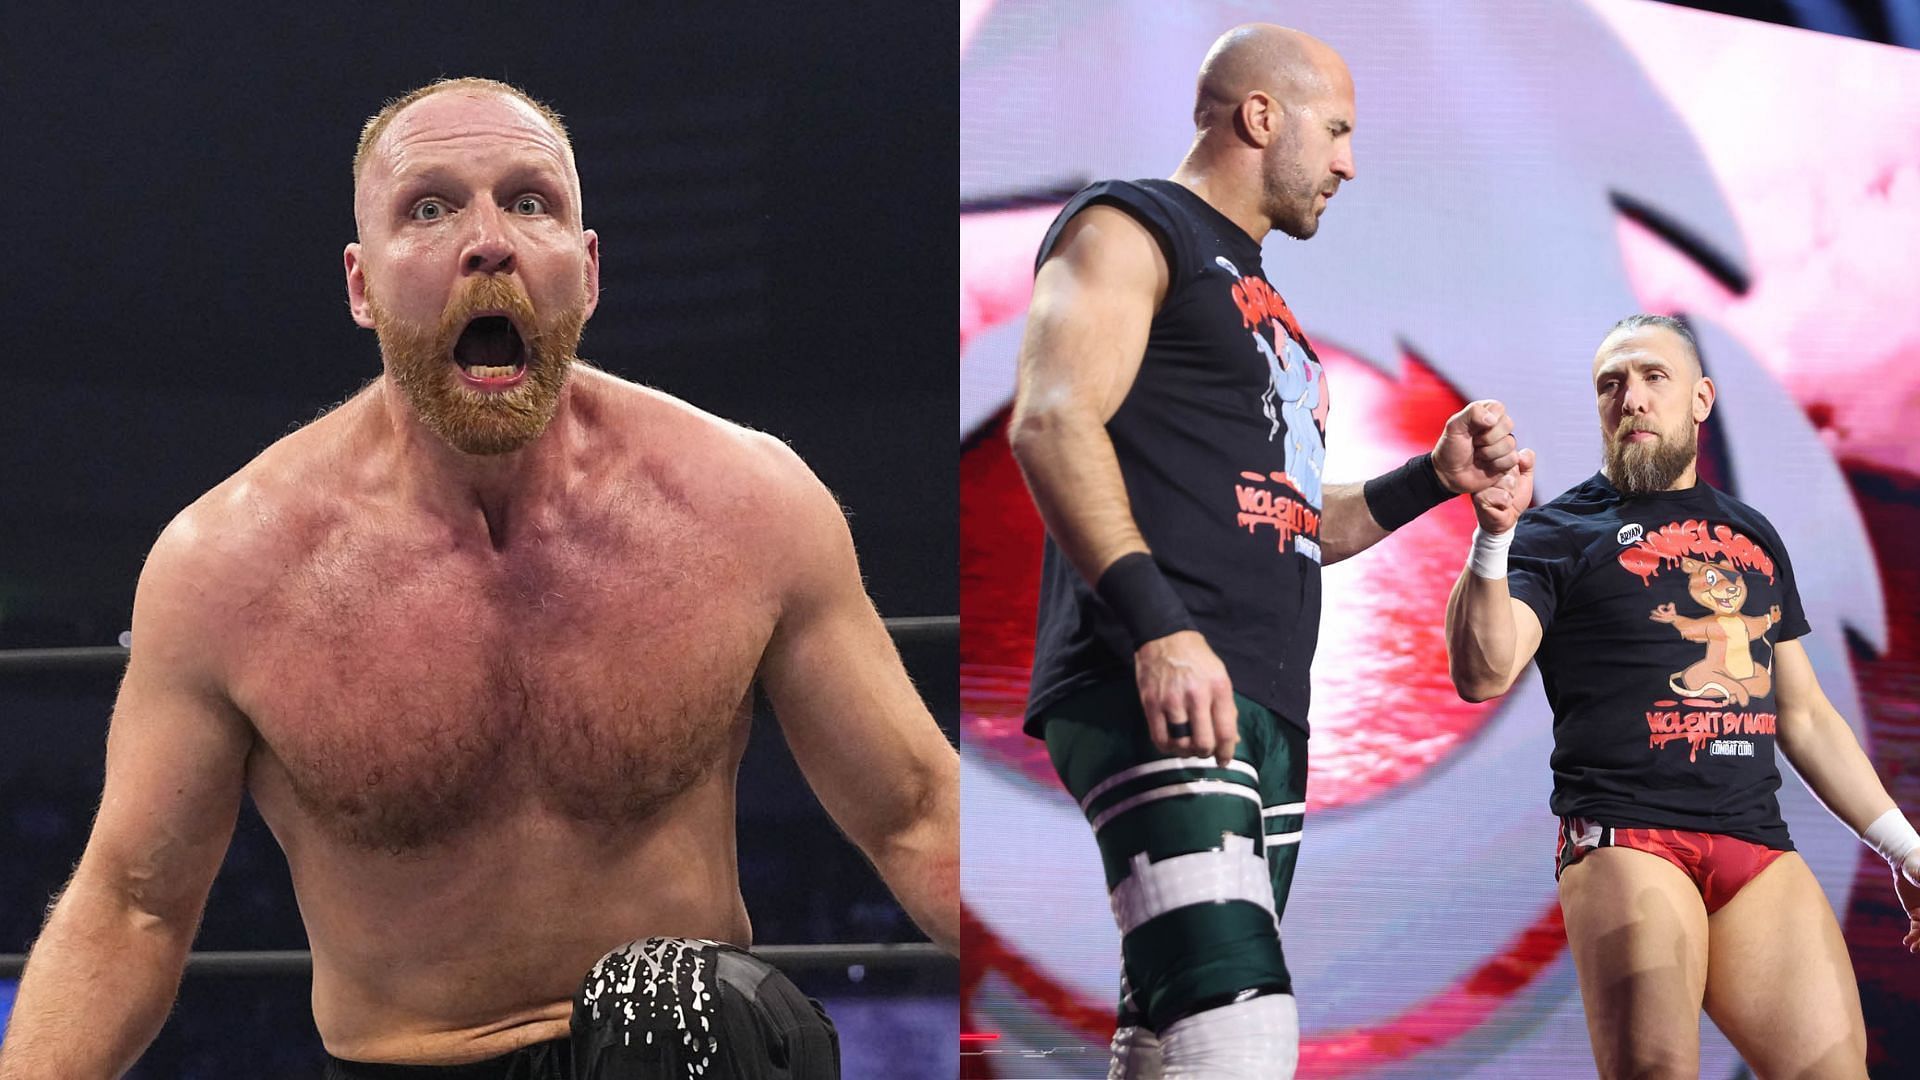 The Blackpool Combat Club is one of the top factions in AEW consisting of Jon Moxley, Bryan Danielson, Claudio Castagnoli, and Wheeler Yuta [Photos courtesy of AEW